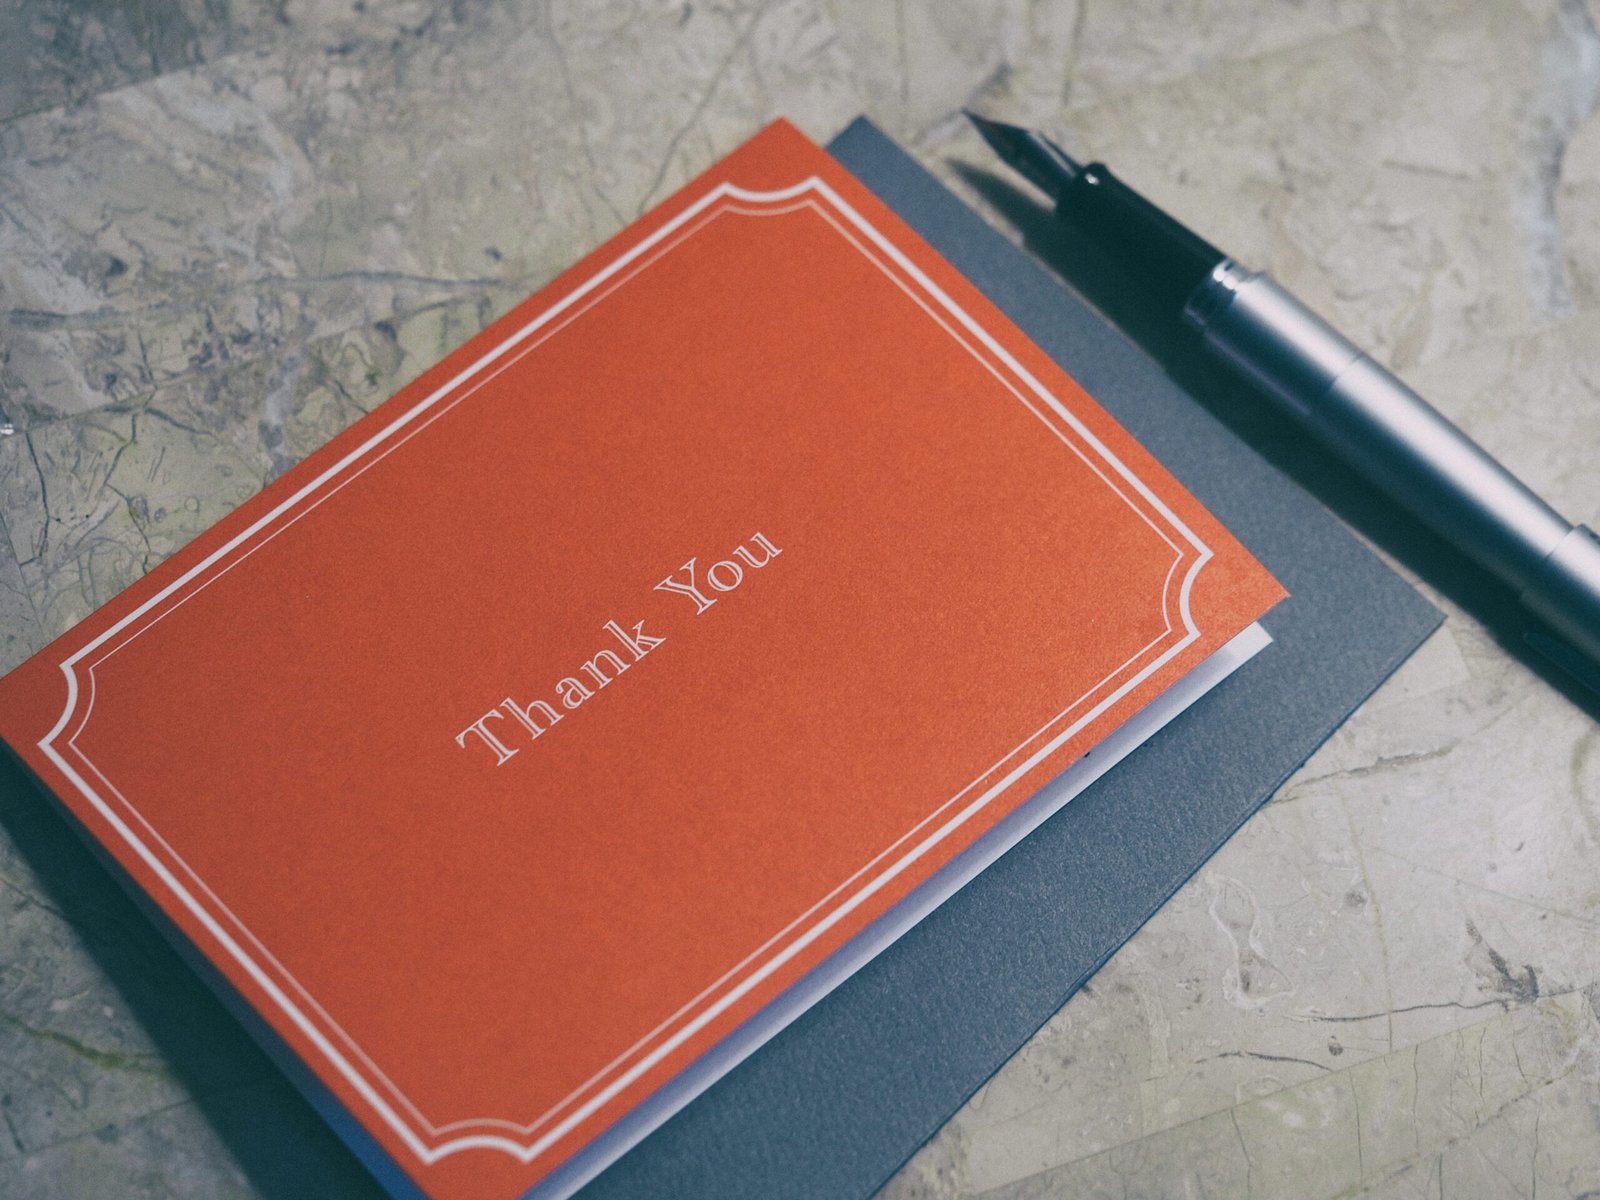 How Do You Begin a Thank-You Card for a Family Member?